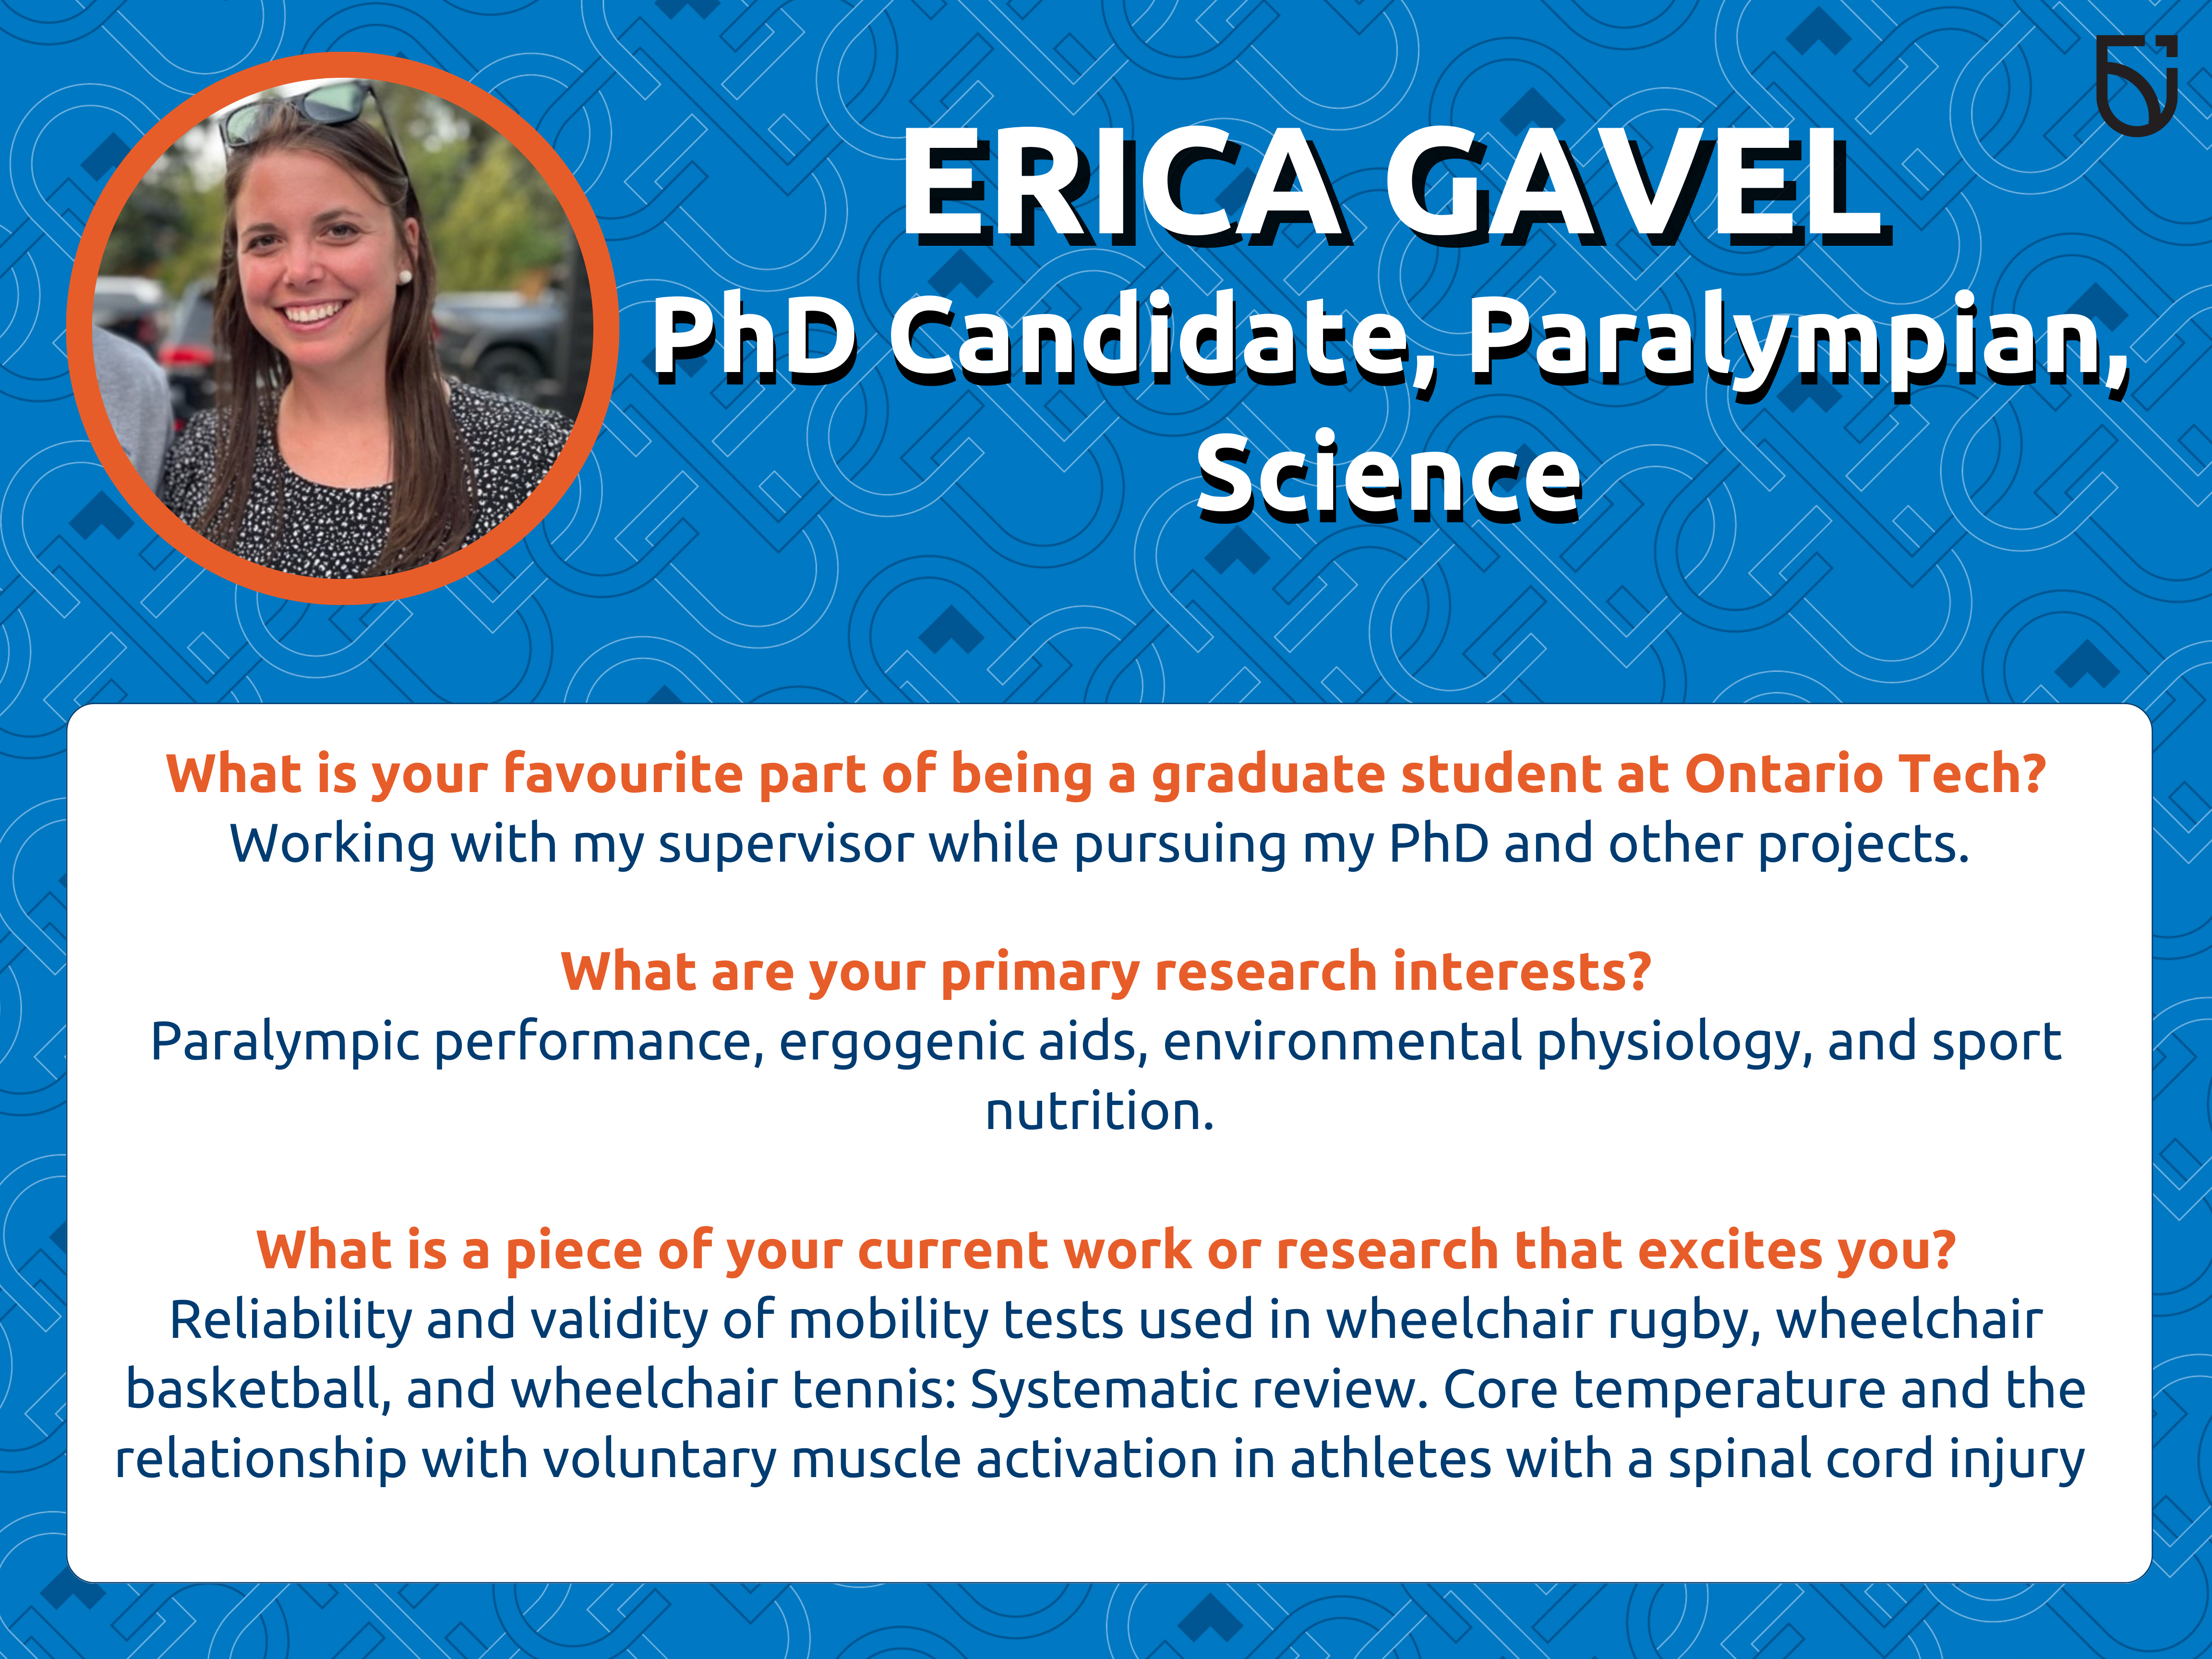 This photo is a Women’s Wednesday feature of Erica Gavel, a PhD Candidate and Paralympian, in the Faculty of Science